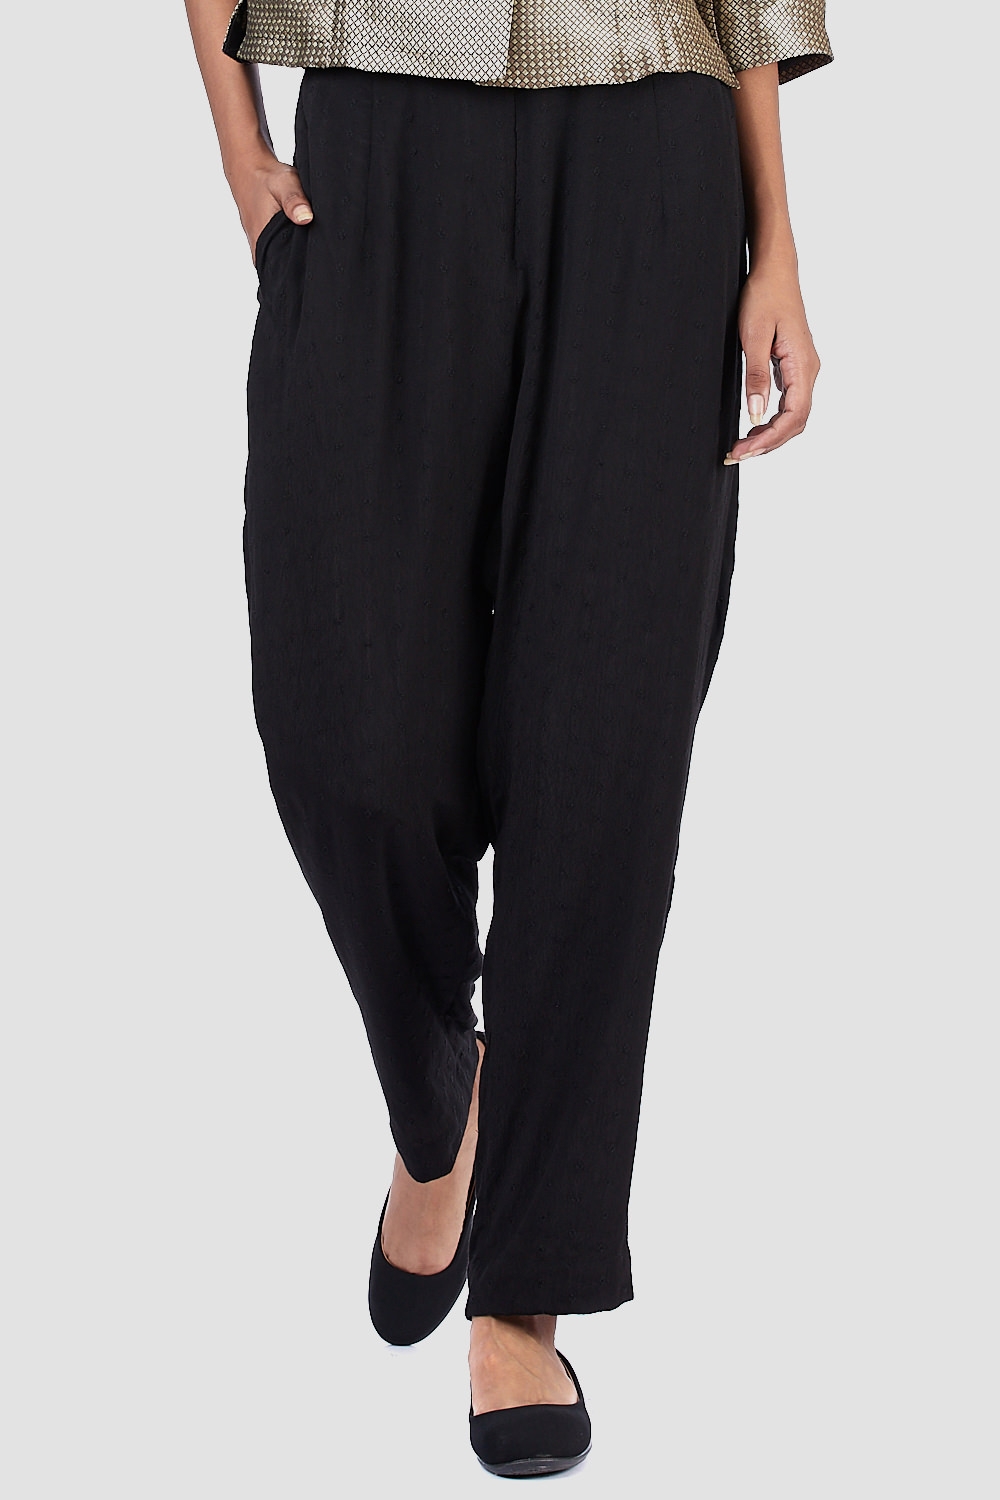 ABRAHAM AND THAKORE | Beej Dot Embroidered Tapered Pant